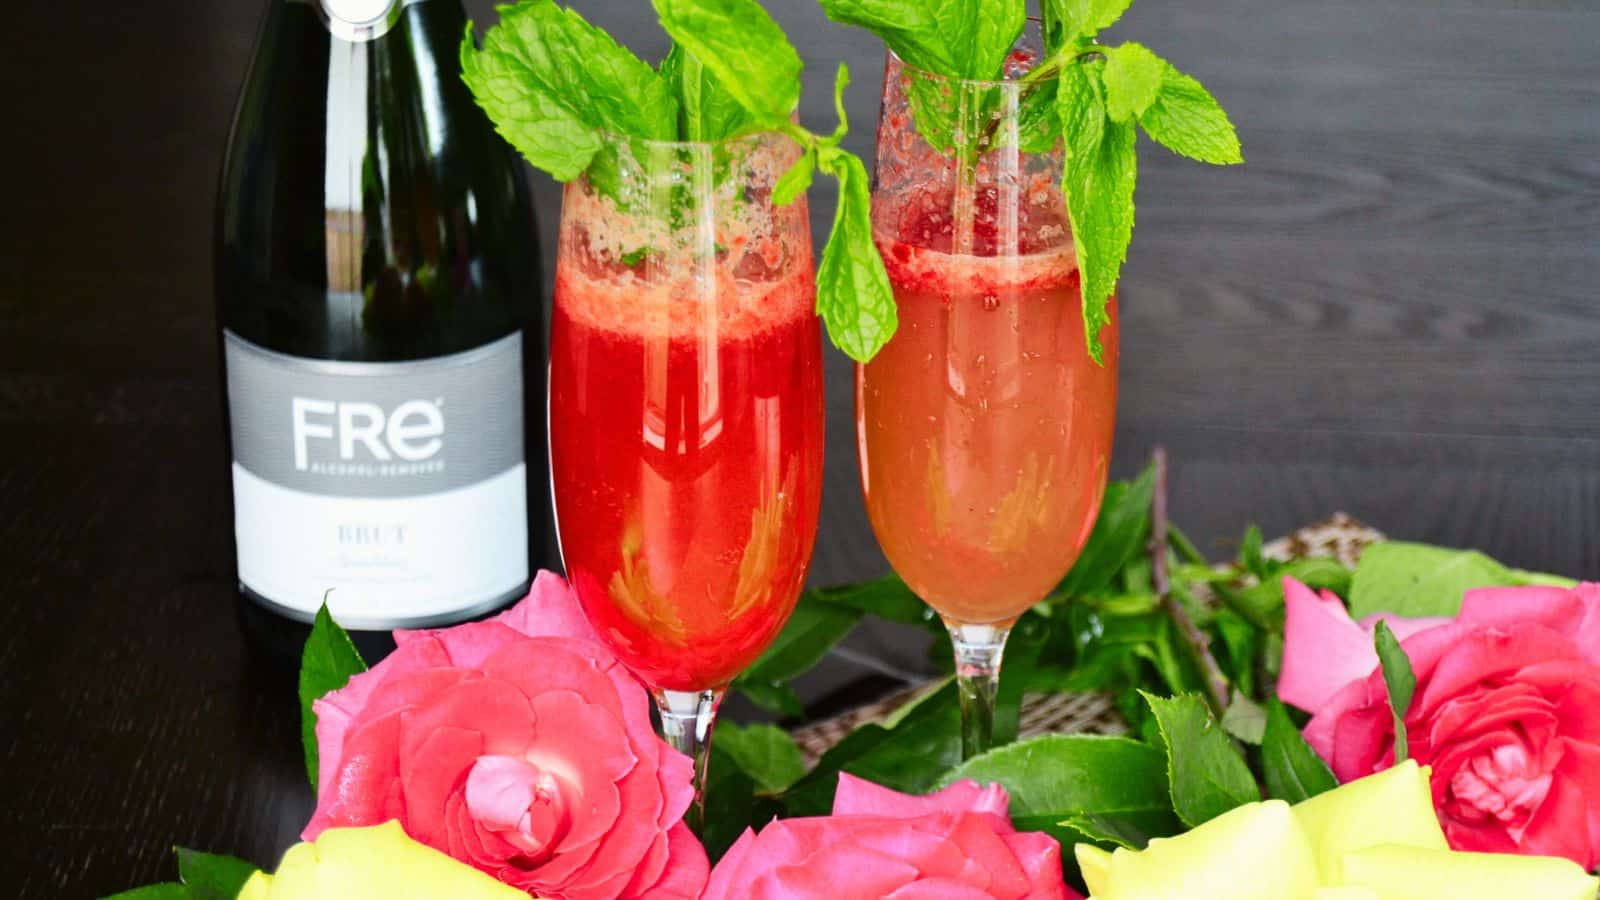 <p>Enjoy a Raspberry Bellini, a simple cocktail that’s quick to make. It’s made with sparkling wine and ripe raspberries, giving it a sweet and tangy flavor. Great for any occasion when you want something refreshing. Takes just a few minutes to prepare, so you can enjoy it in no time.<br><strong>Get the Recipe: </strong><a href="https://reneenicoleskitchen.com/fre-raspberry-bellini/?utm_source=msn&utm_medium=page&utm_campaign=10%20classic%20cocktails%20&%20mocktails%20you%20should%20know%20how%20to%20make">Raspberry Bellini</a></p>